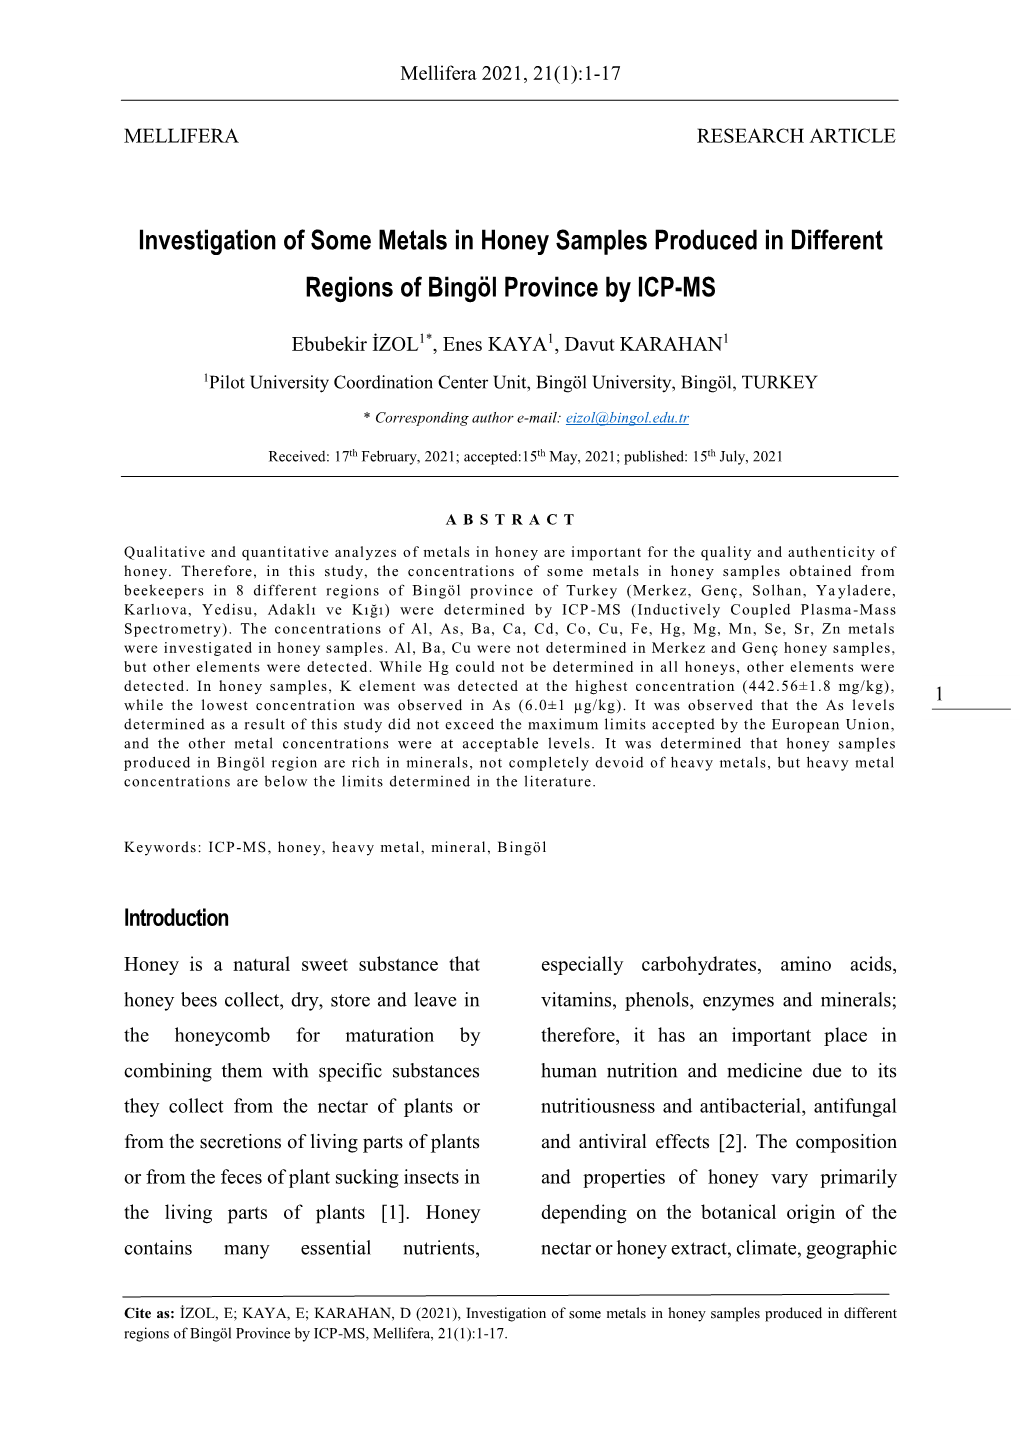 Investigation of Some Metals in Honey Samples Produced in Different Regions of Bingöl Province by ICP-MS